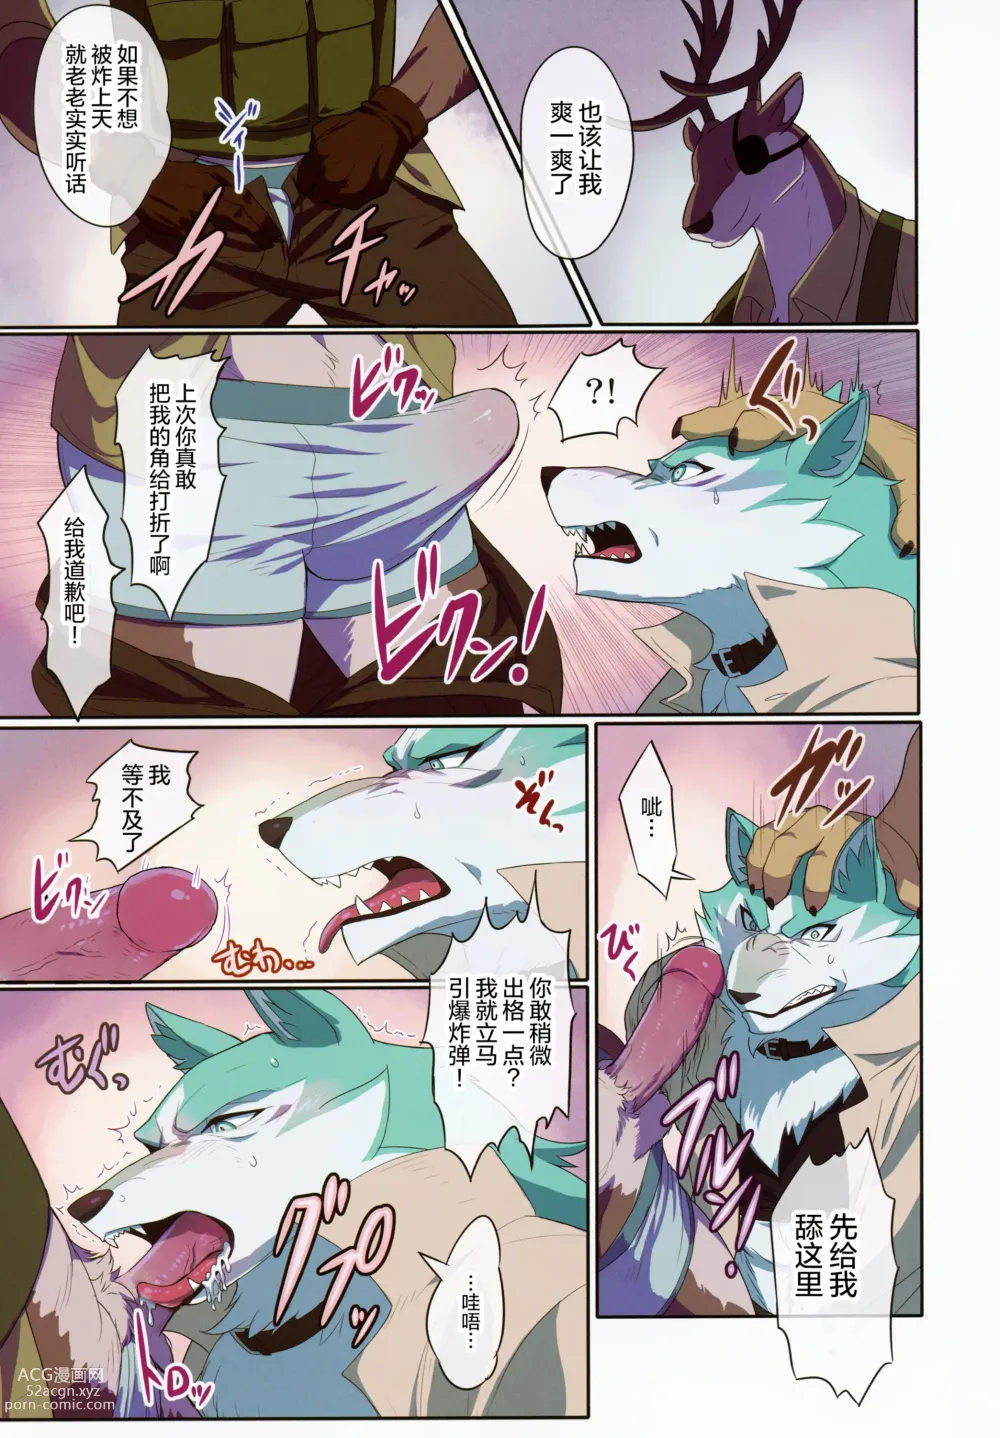 Page 9 of doujinshi 智取炸弹犯